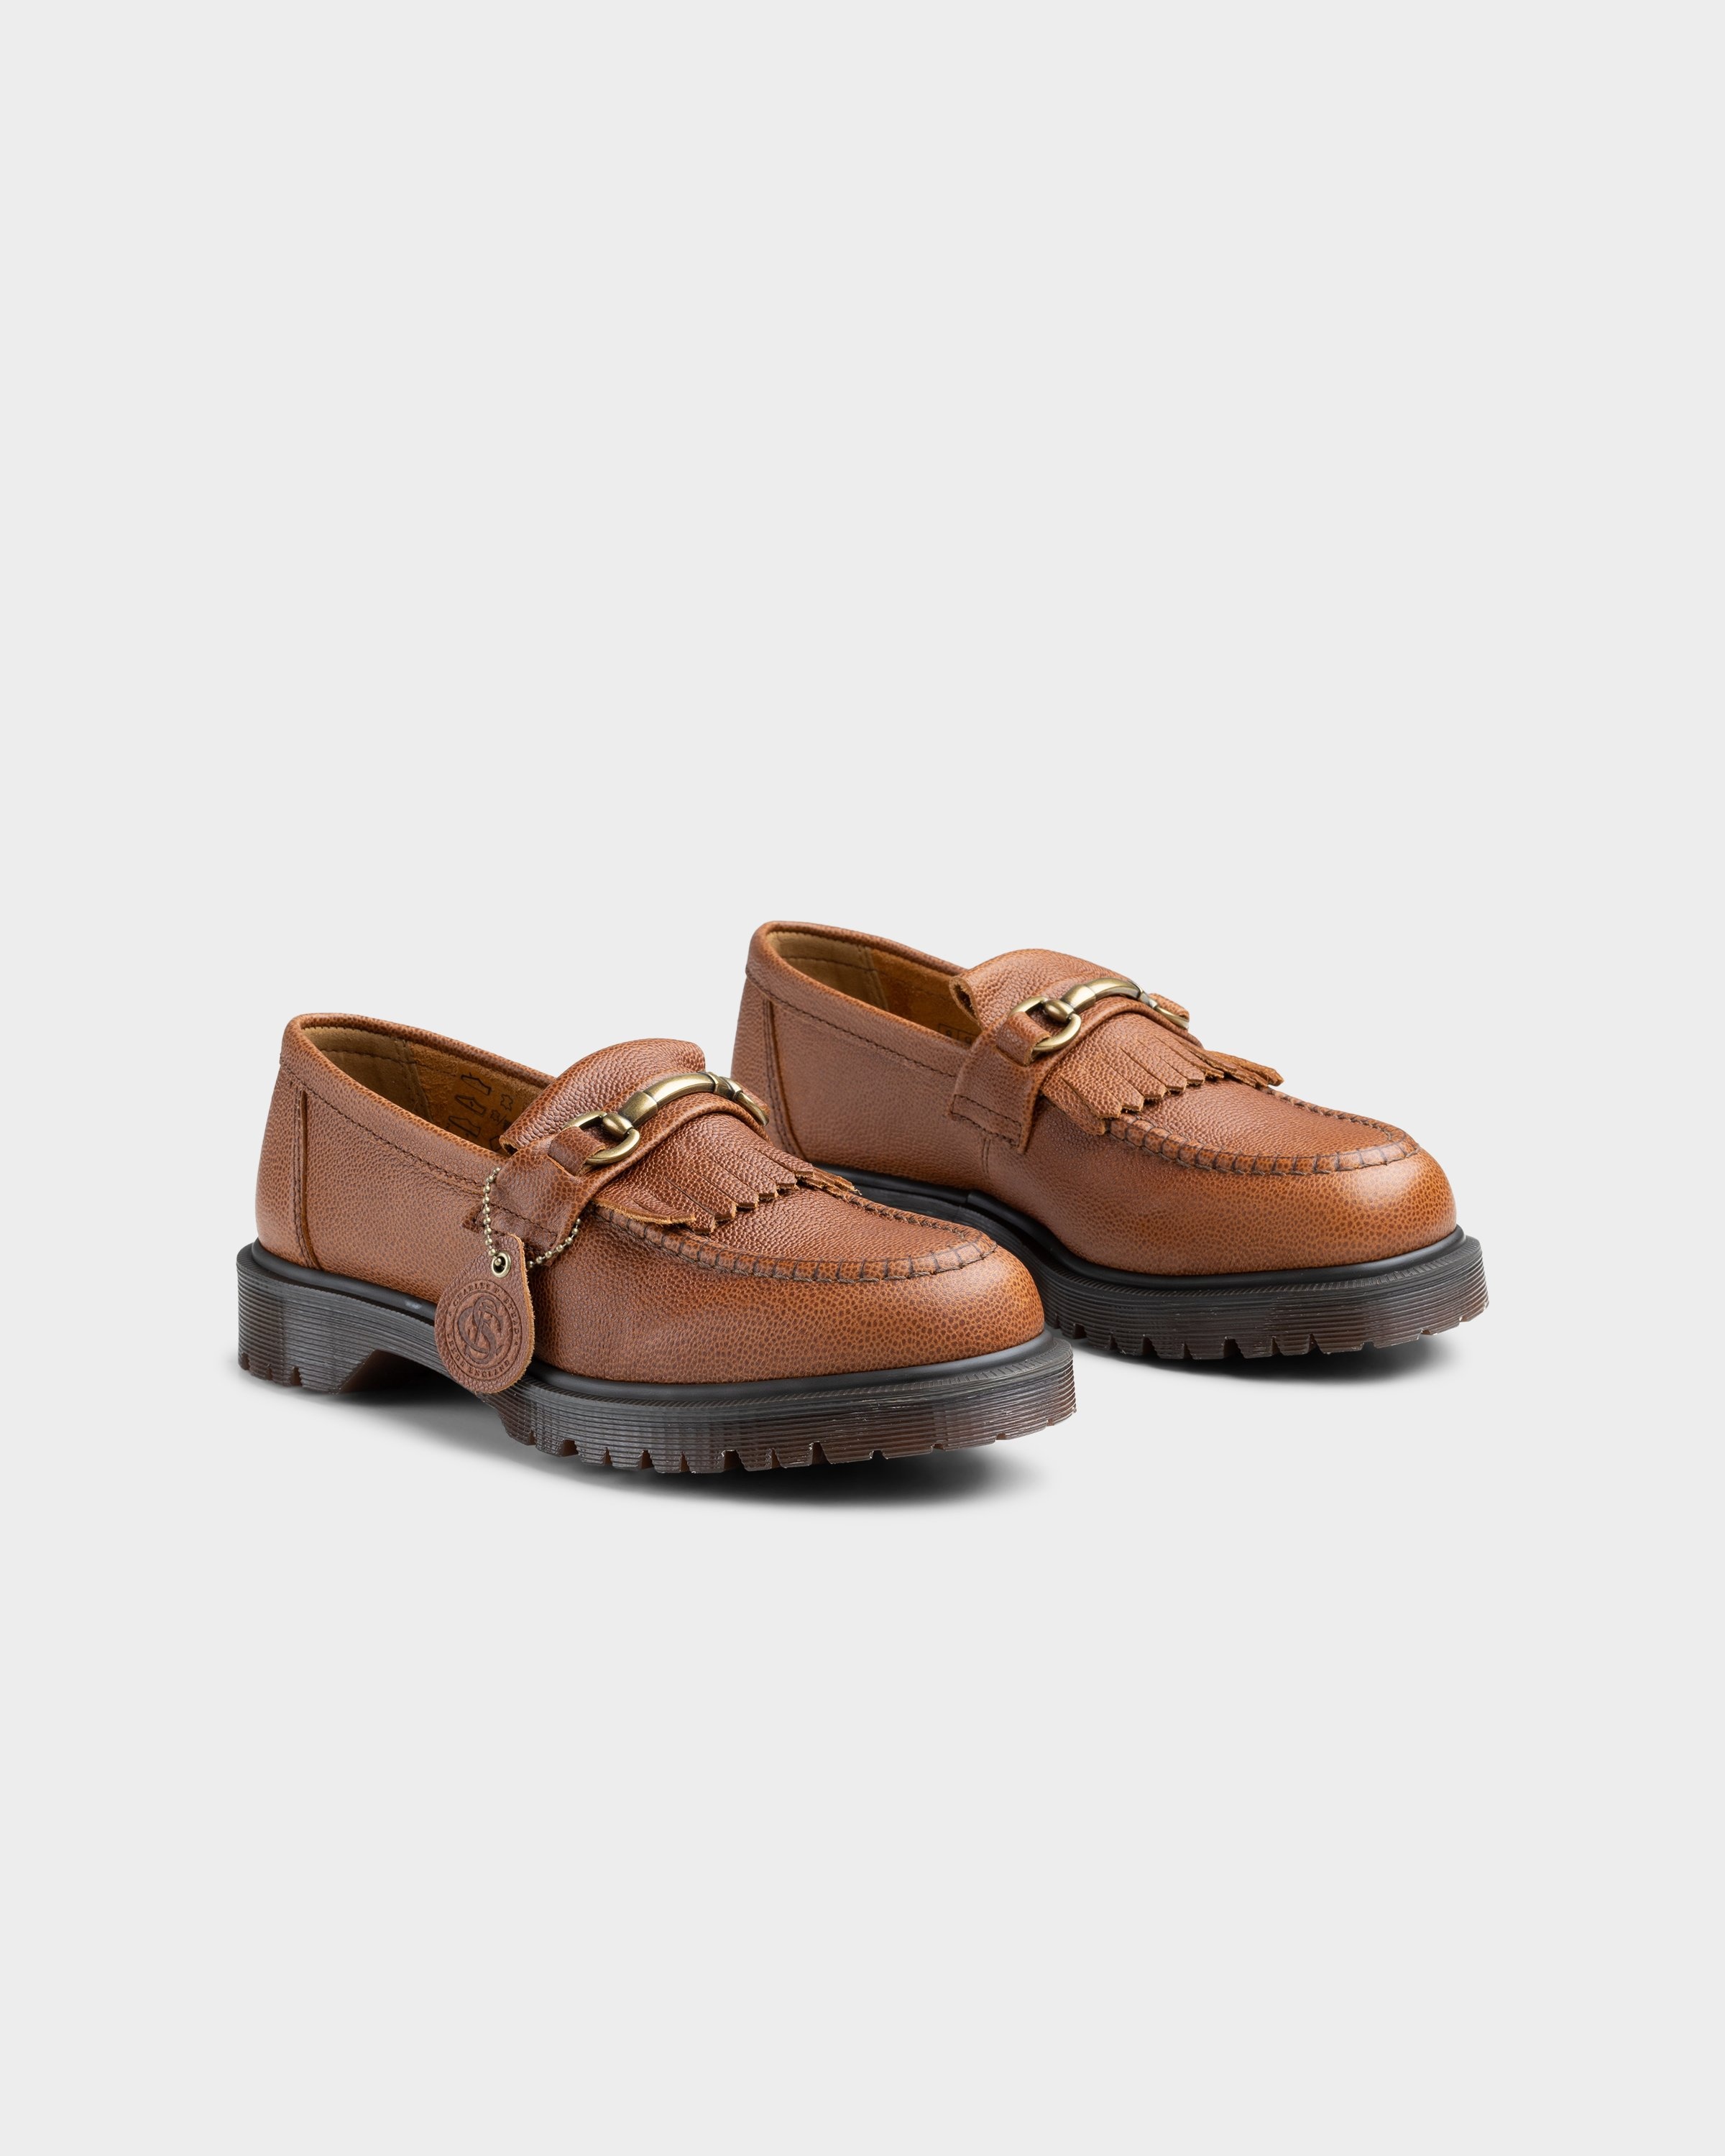 Dr. Martens – Adrian Snaffle Westminster Brown - Shoes - Brown - Image 3